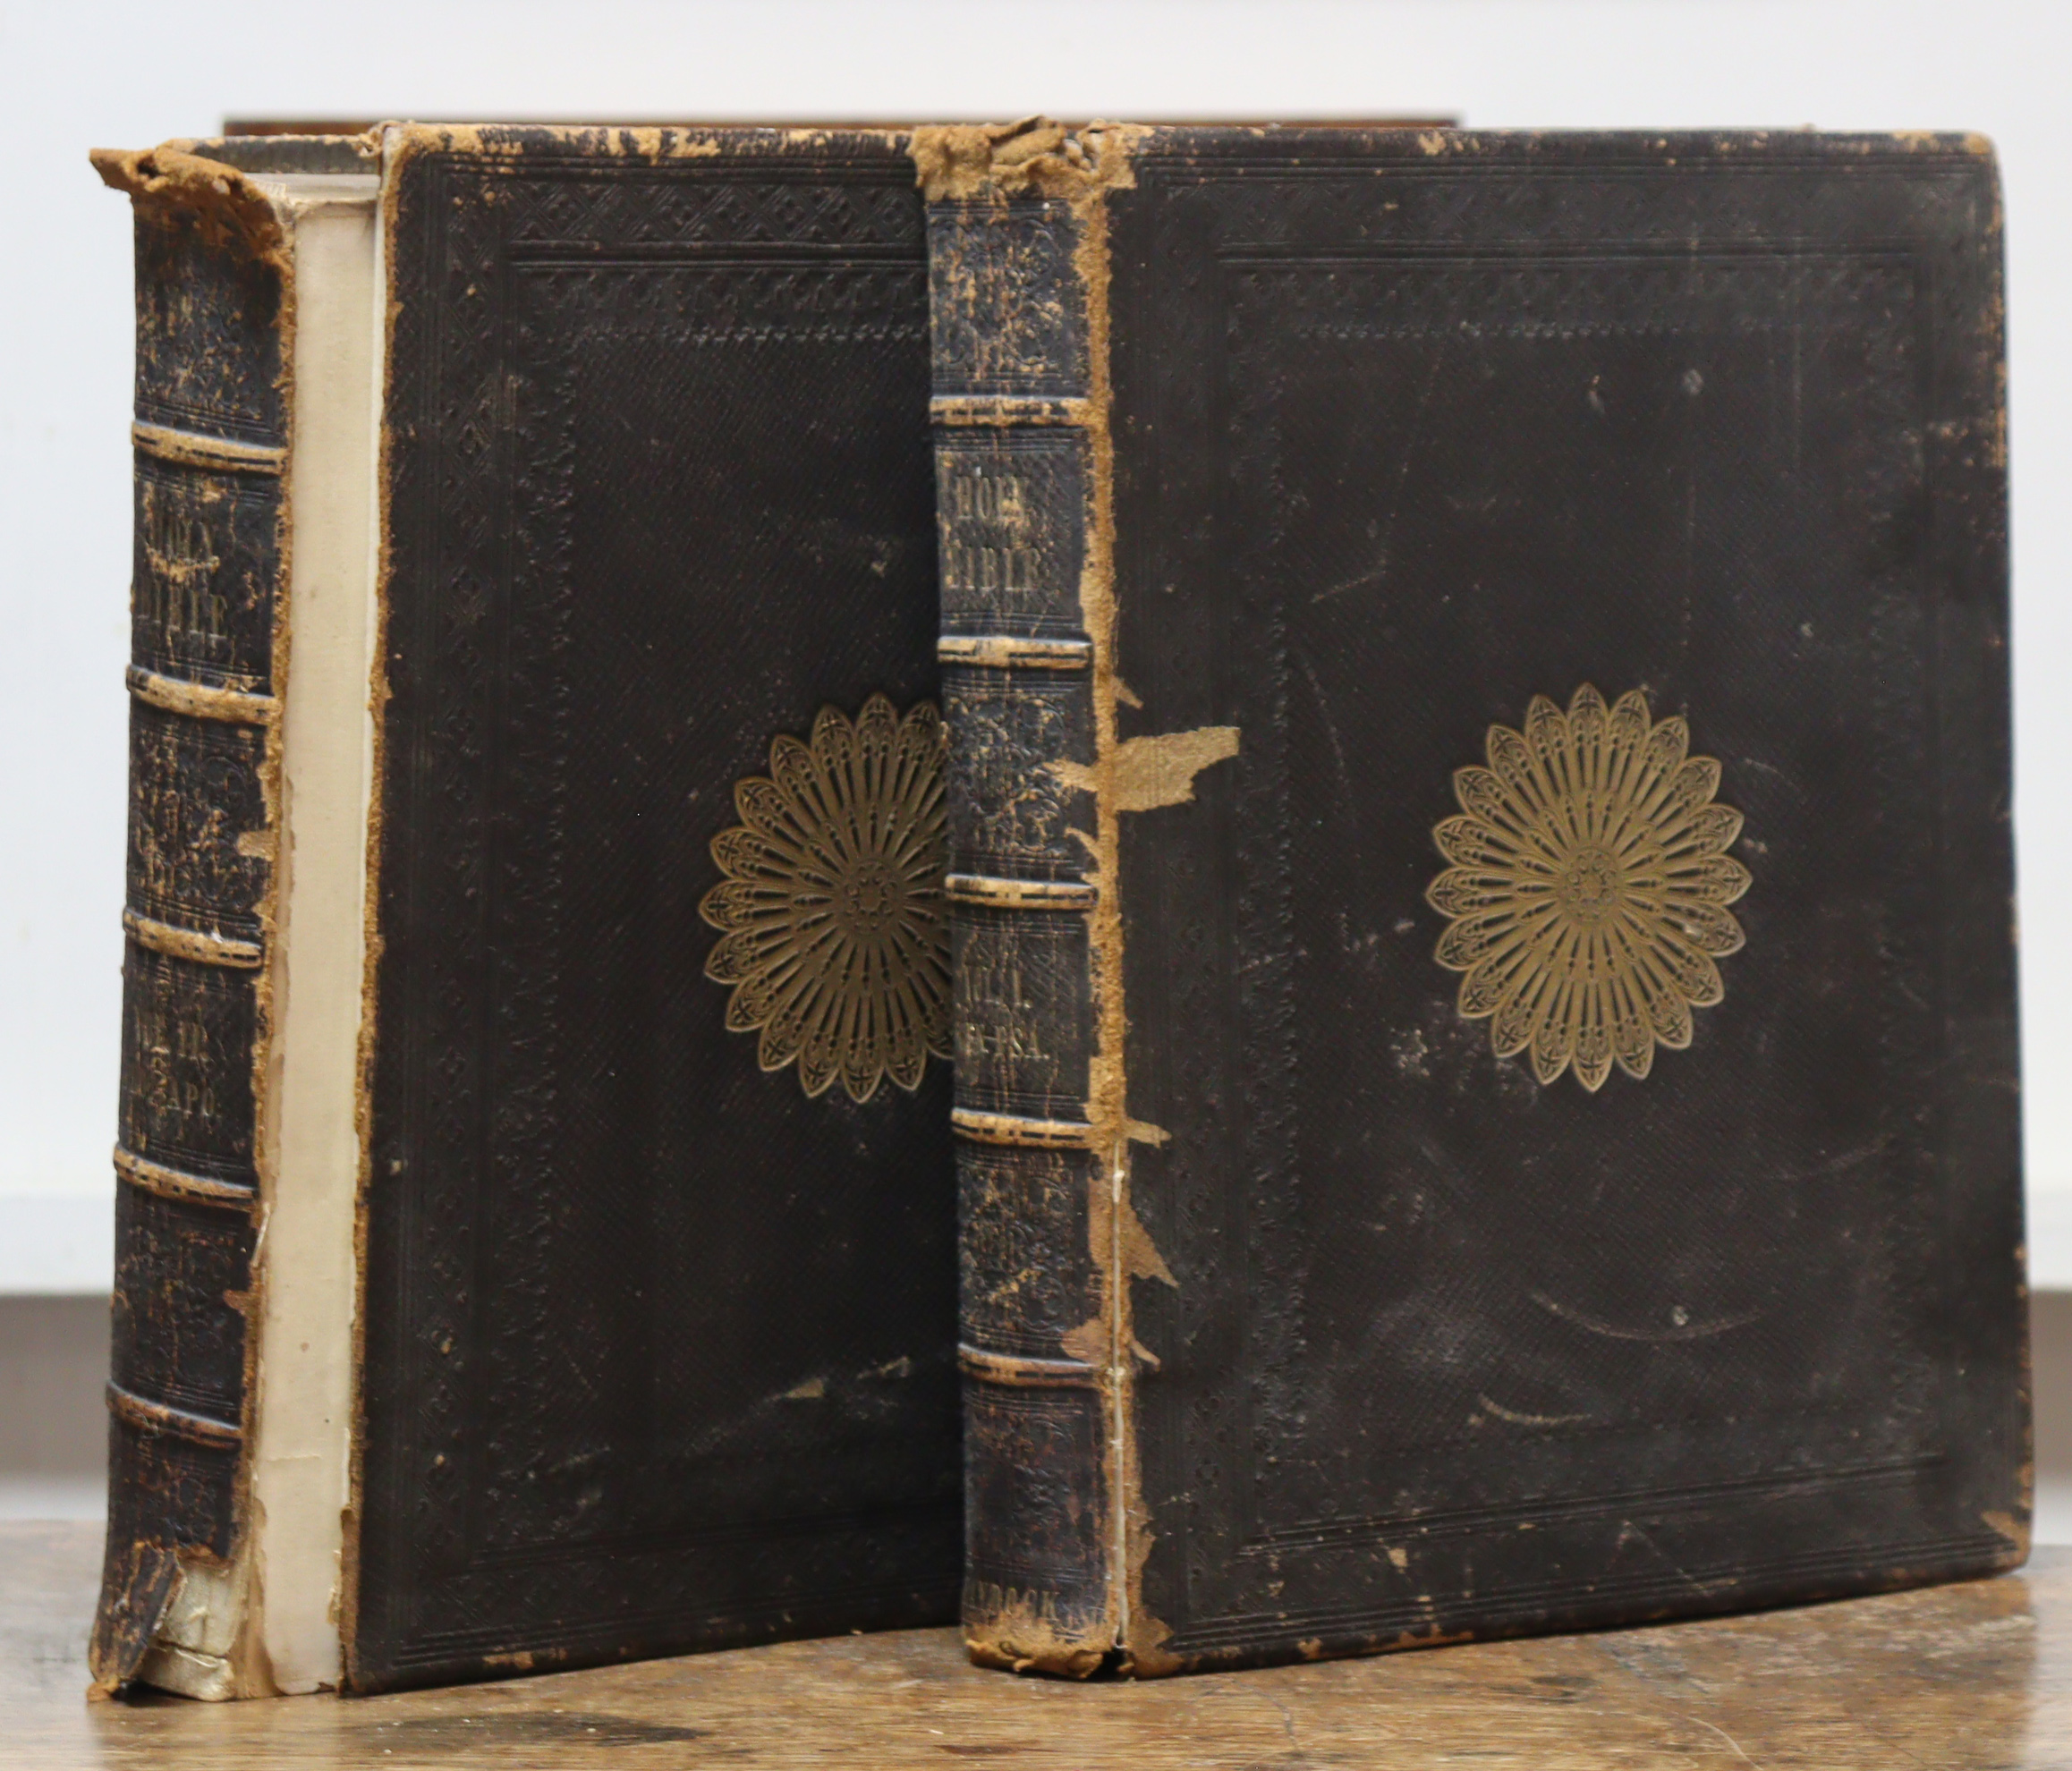 Two mid-19th century volumes “The Holy Bible, translated from the Latin...